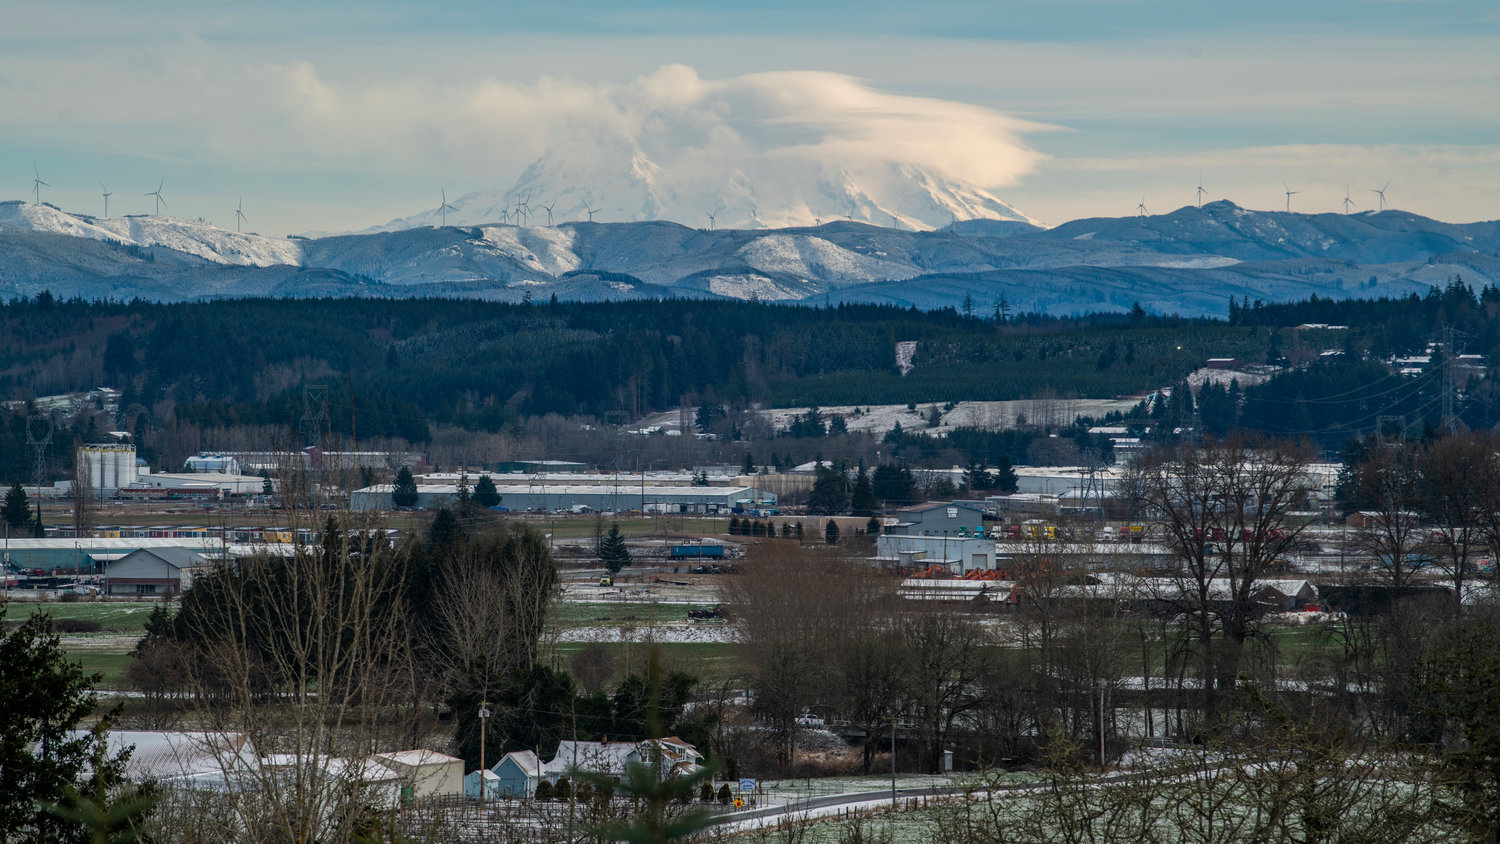 Clouds shroud Mount Rainier as snow sticks to the ground across Lewis County in this photo captured from a vantage point west of Chehalis. Turbines from the Skookumchuck Wind Farm can be seen on the ridge.